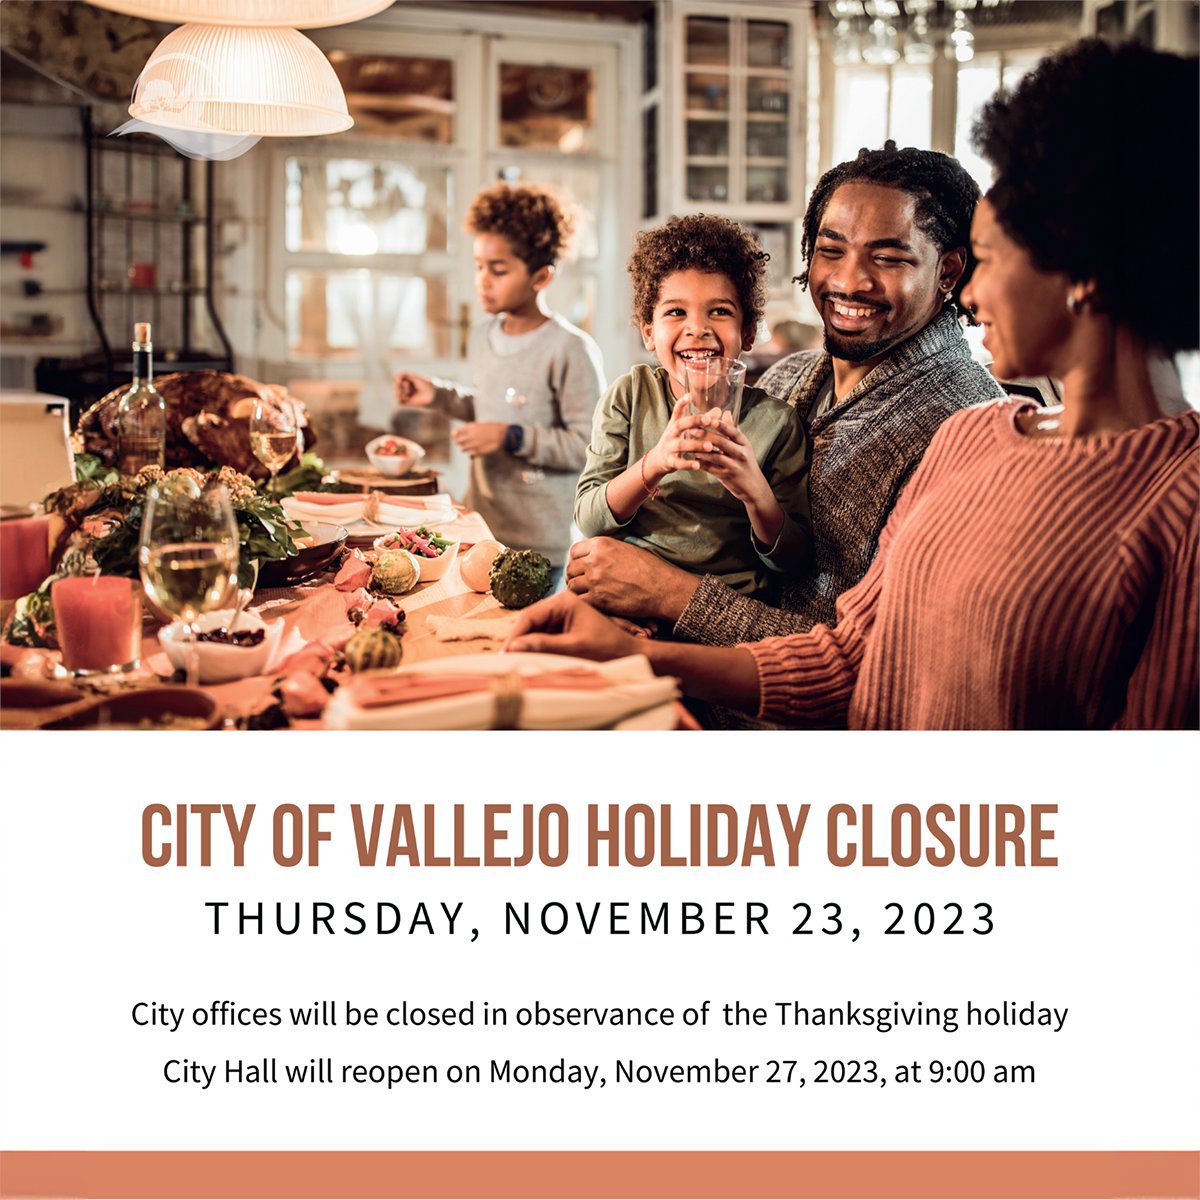 In the spirit of gratitude and celebration, please be informed that the City of Vallejo offices will be closed for the Thanksgiving holiday. Wishing you a joyous Thanksgiving filled with warmth, laughter, and delightful moments.